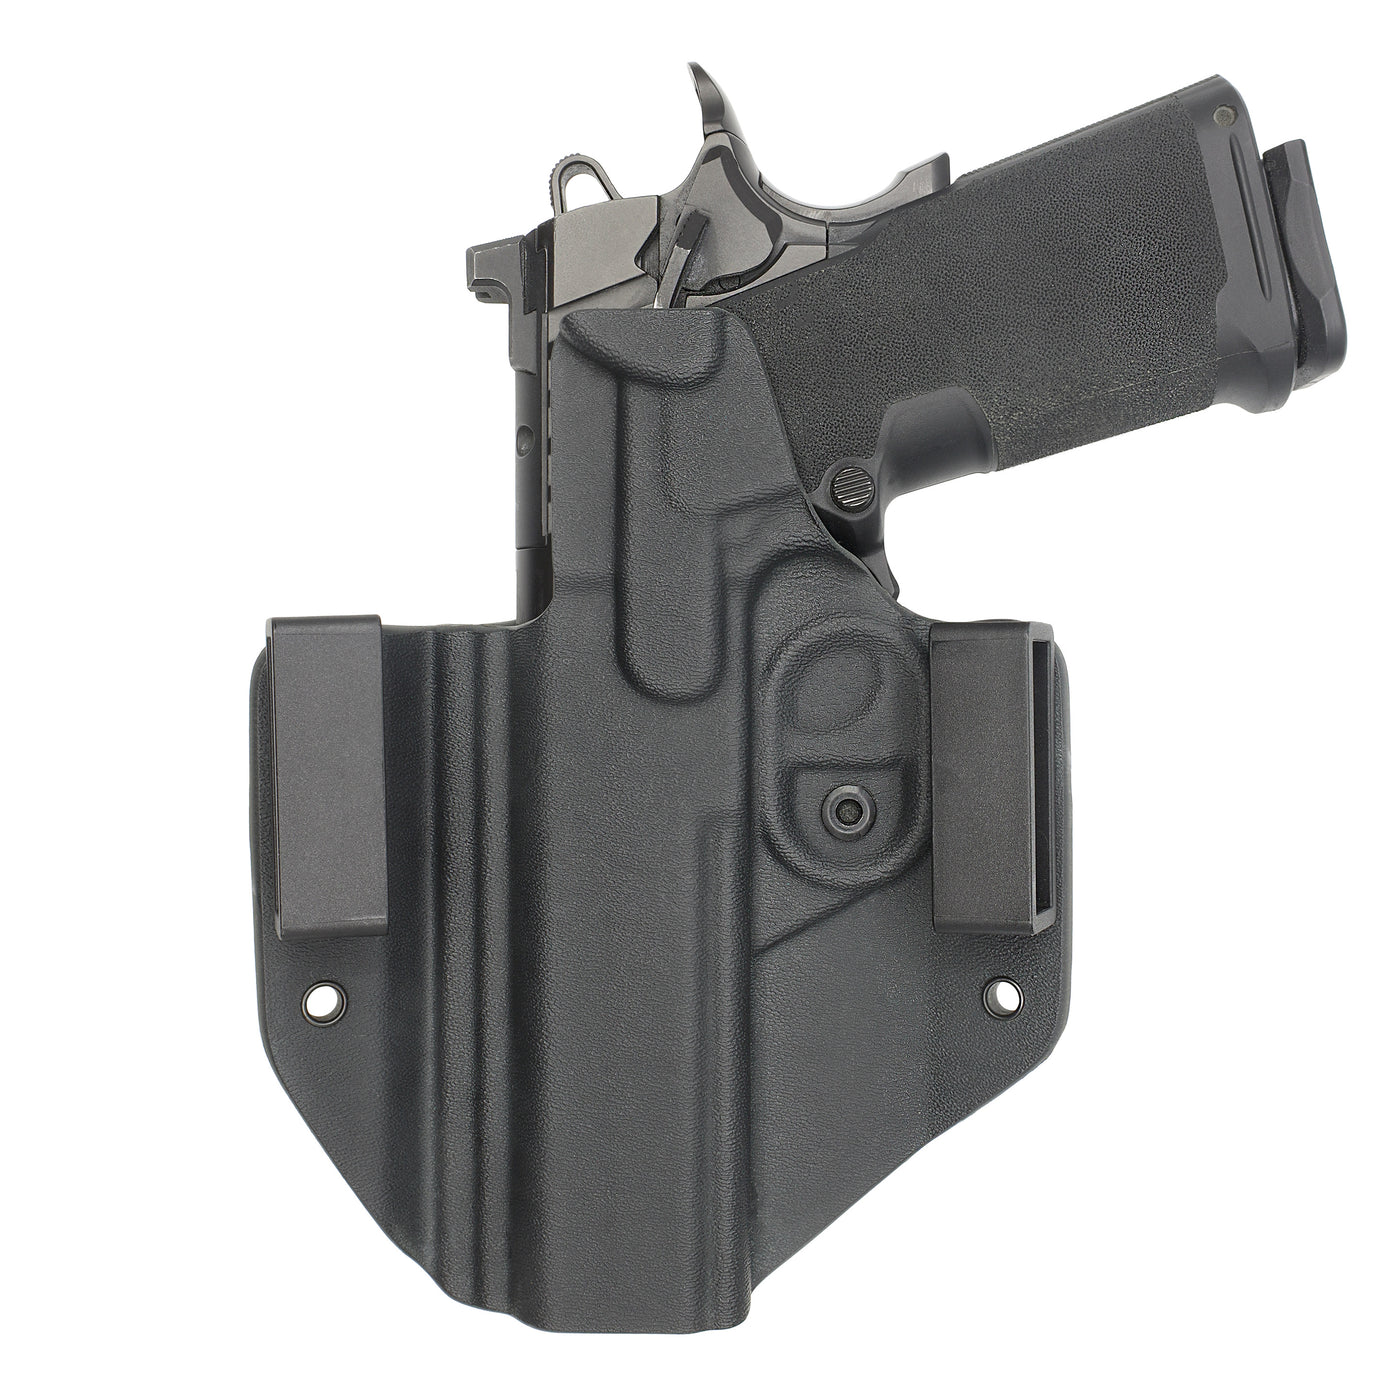 C&G Holsters Quickship OWB Springfield 1911 DS Prodigy holstered back view